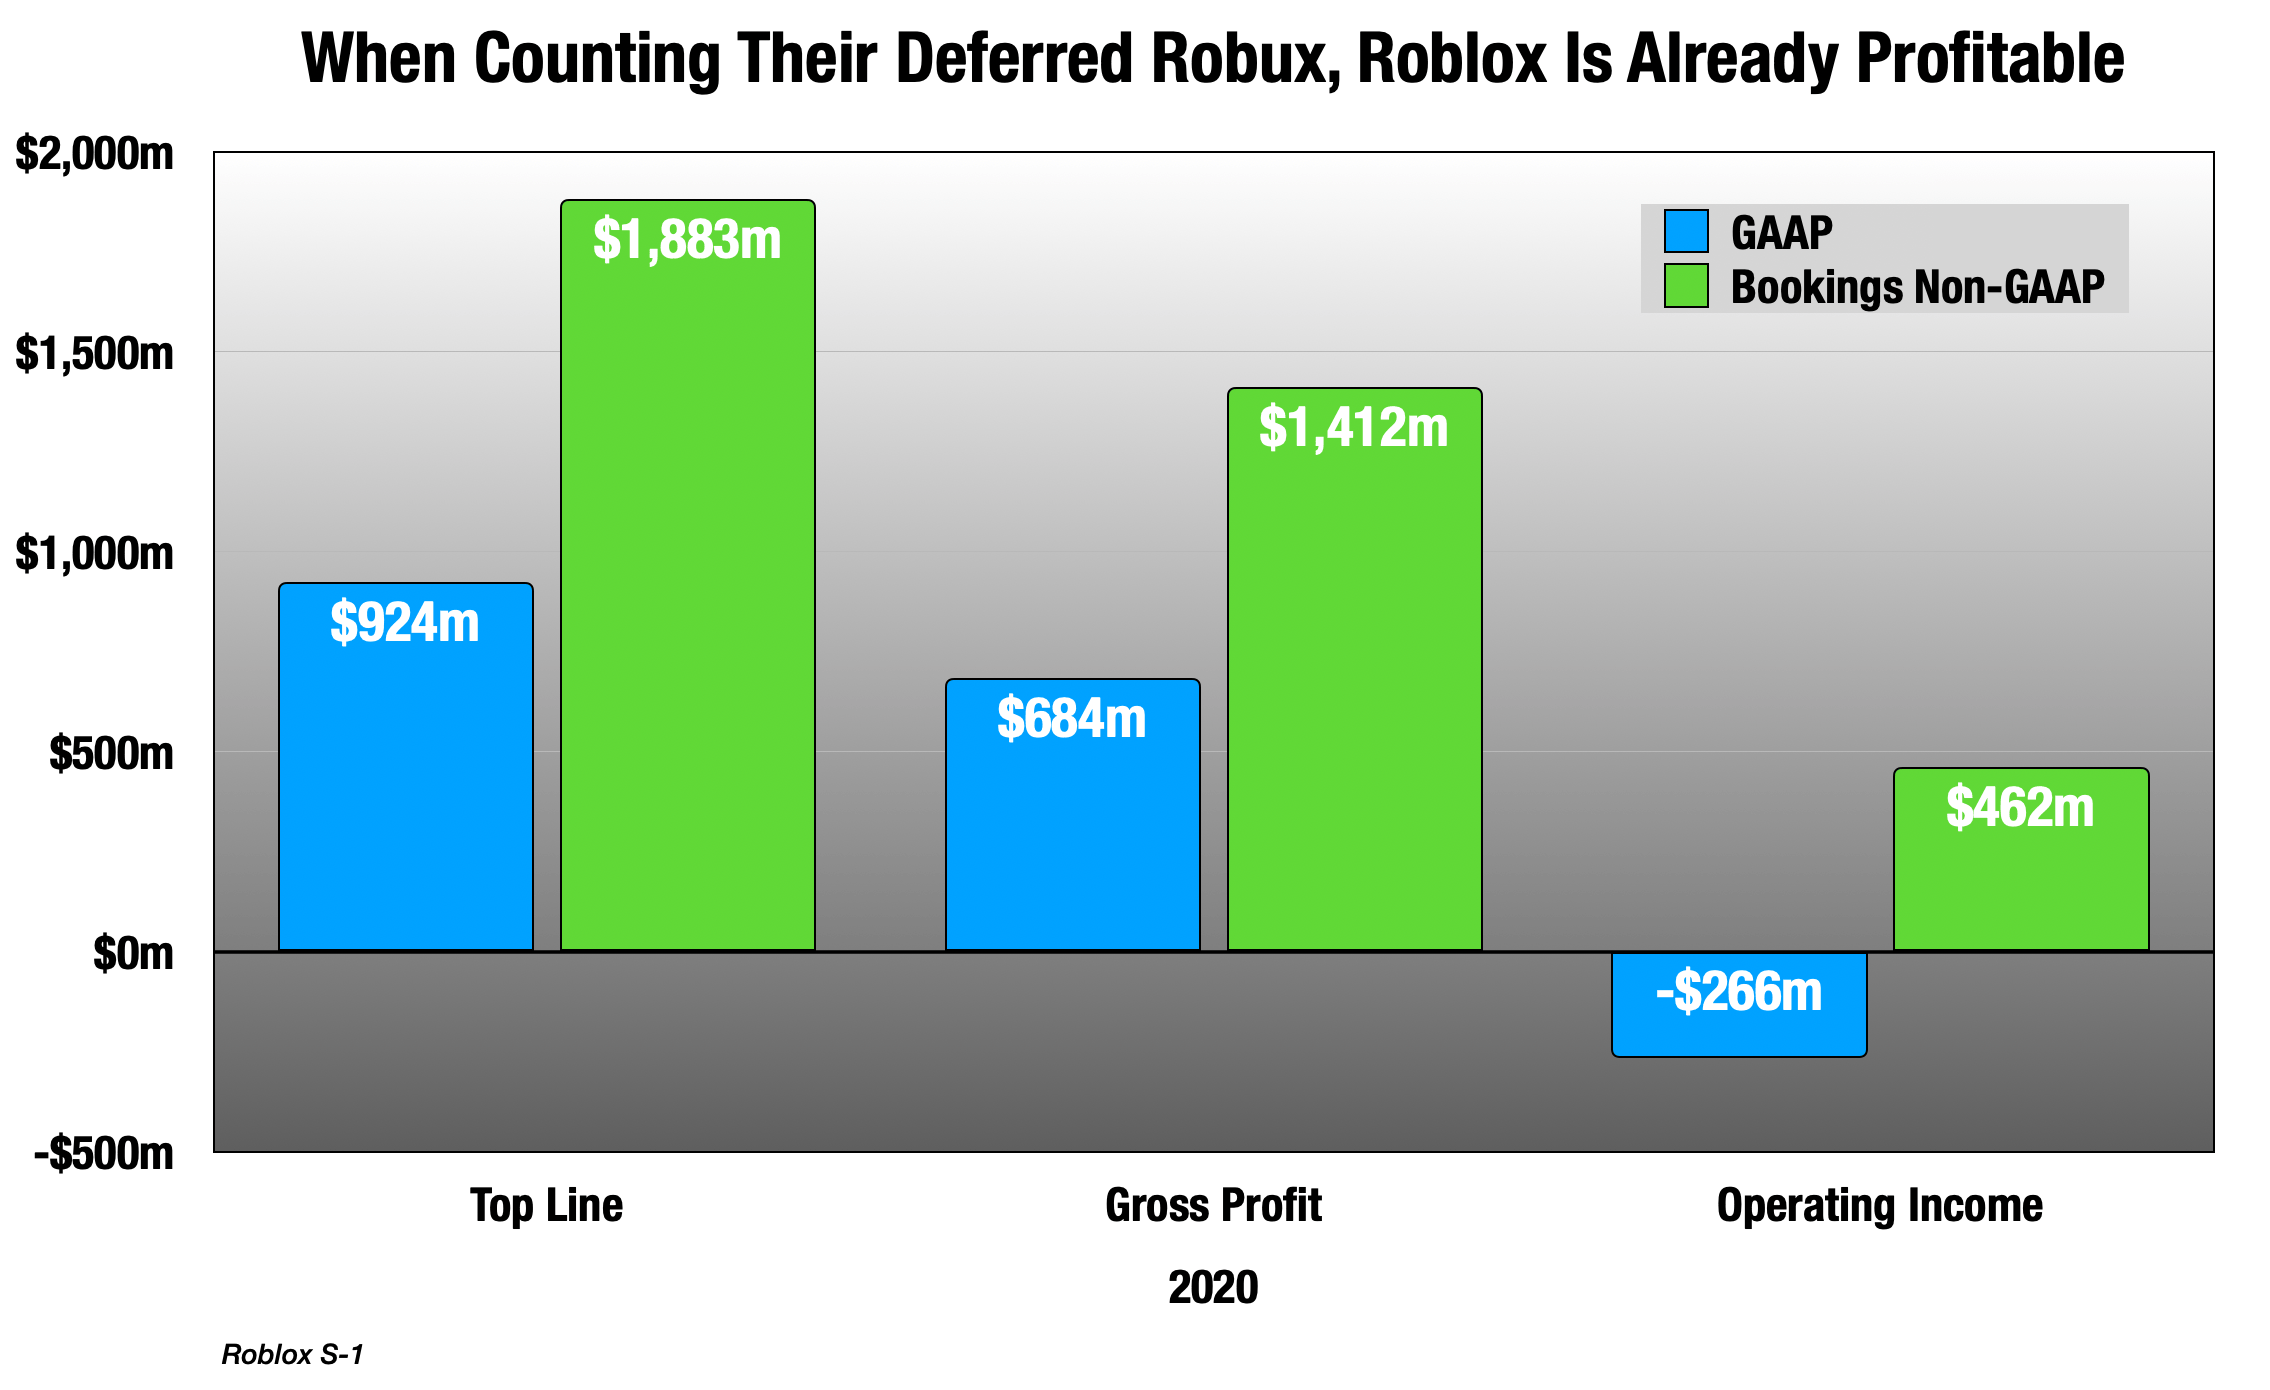 Roblox Shares Surge After Earnings, Virtual Currency Sales Grew 20% -  Tokenist